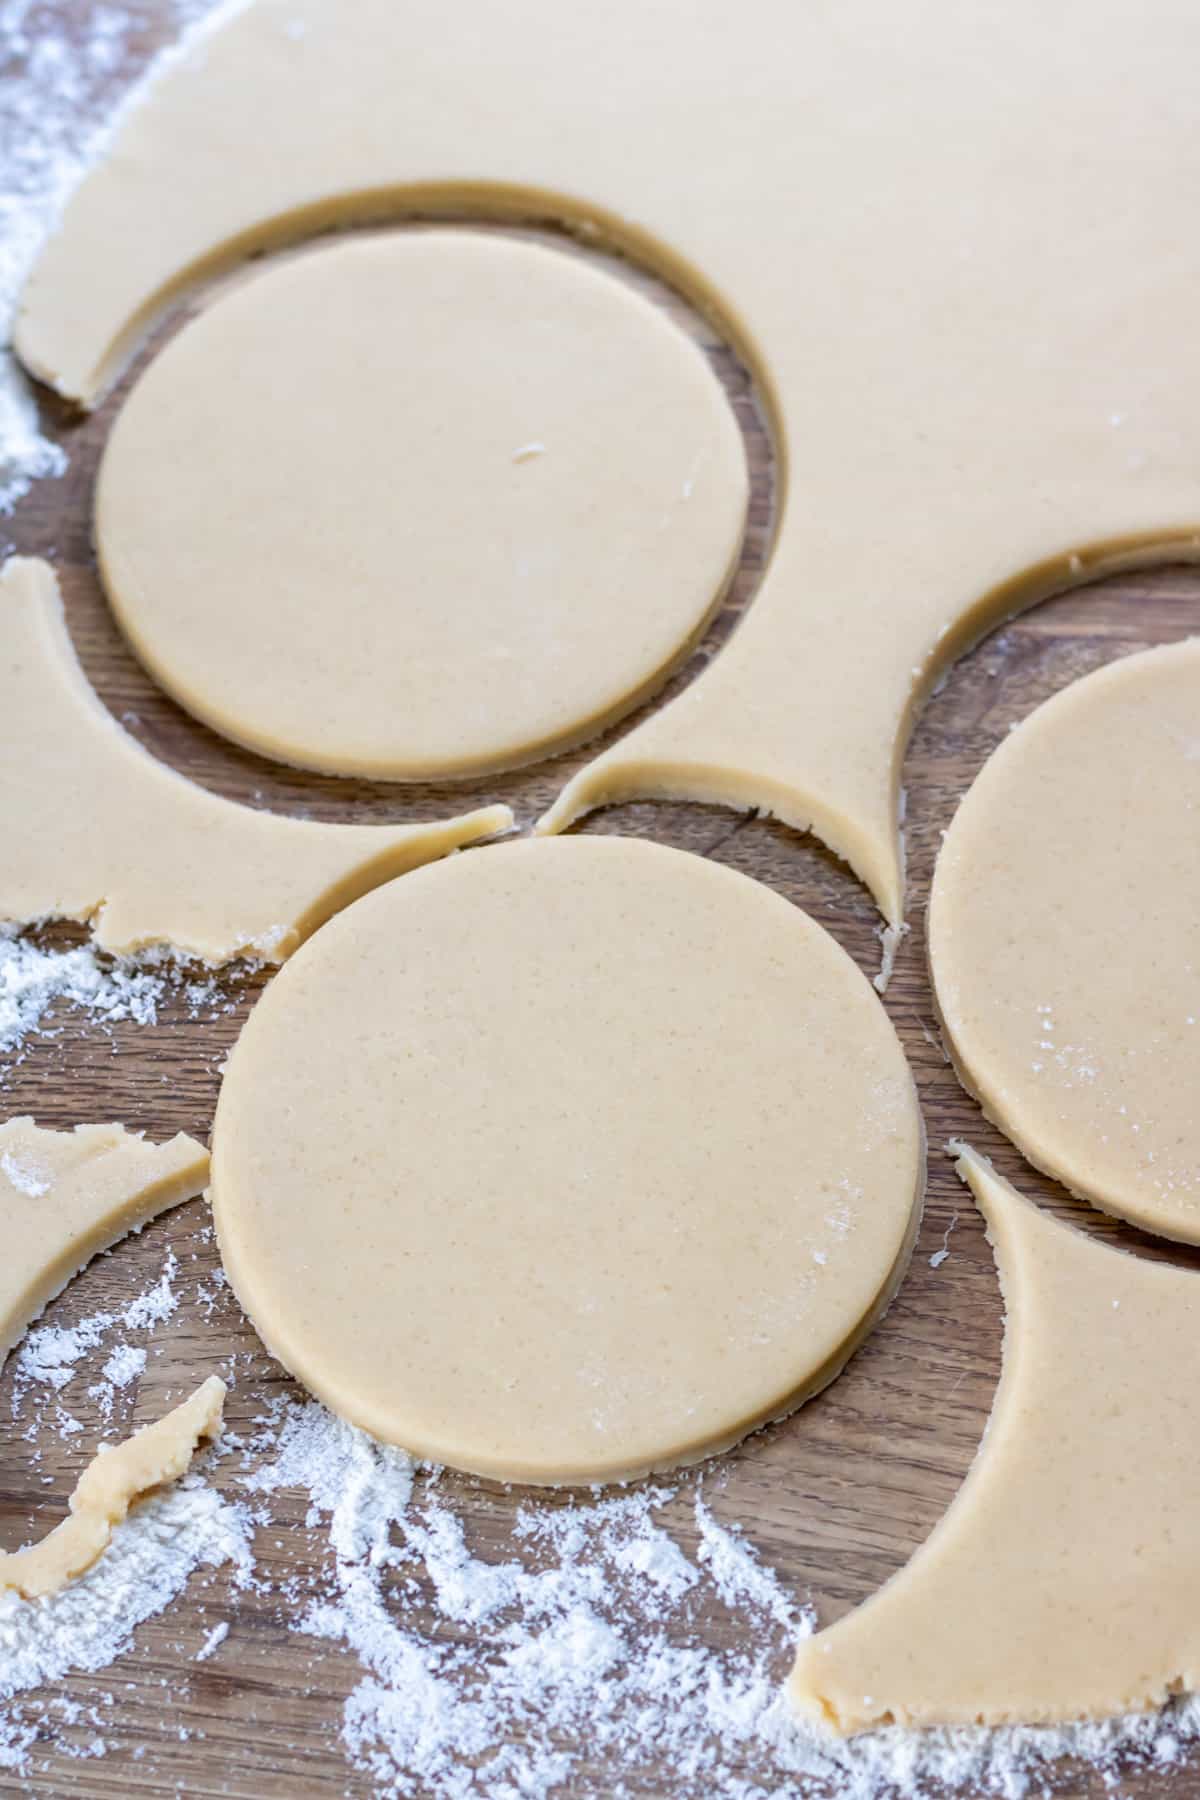 Cutting circle shapes out of the sugar cookie dough.